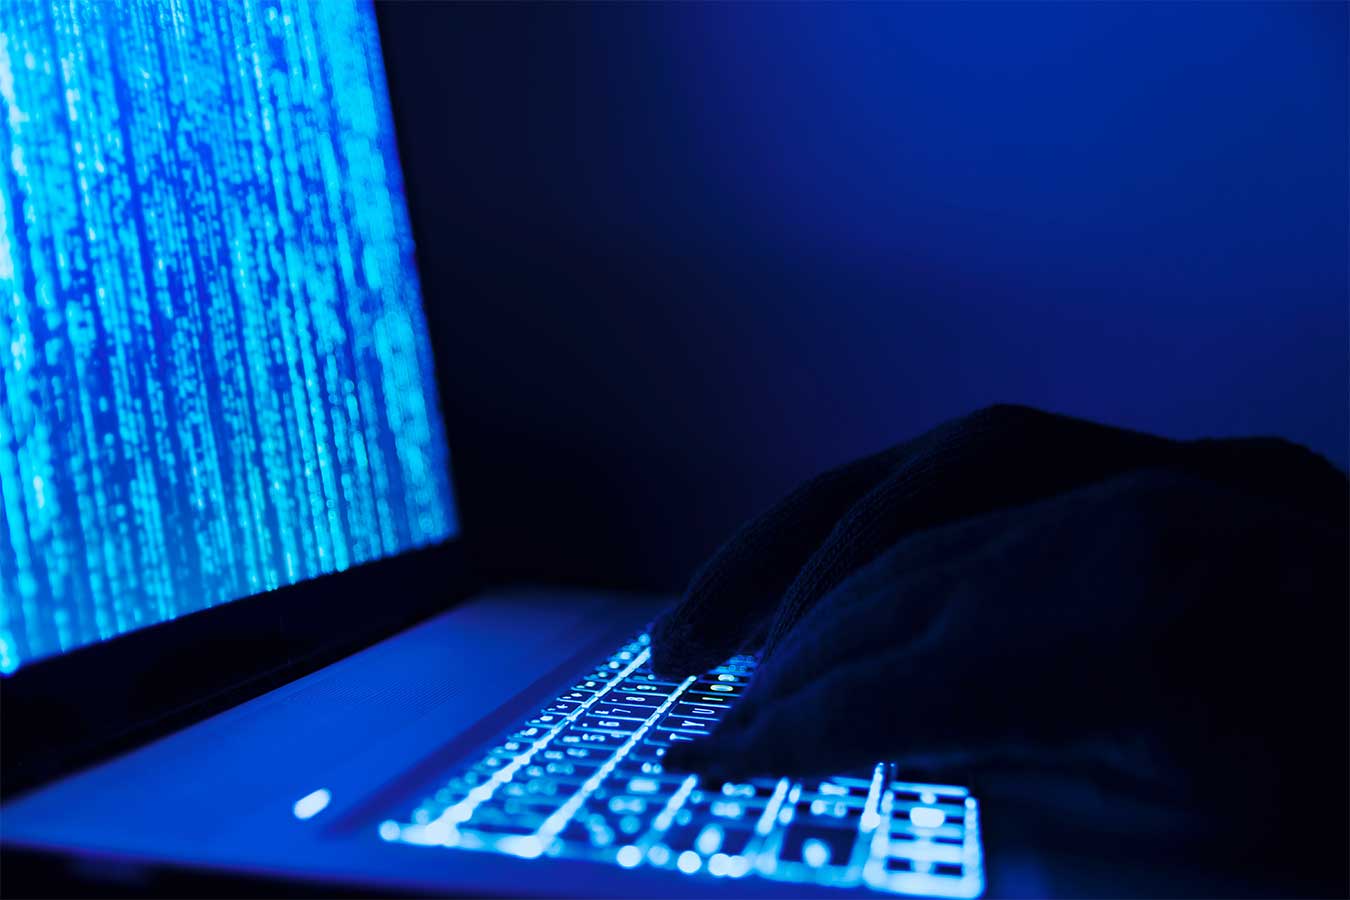 A stock image of black gloved hands typing on a laptop with blue light emanating from it.  